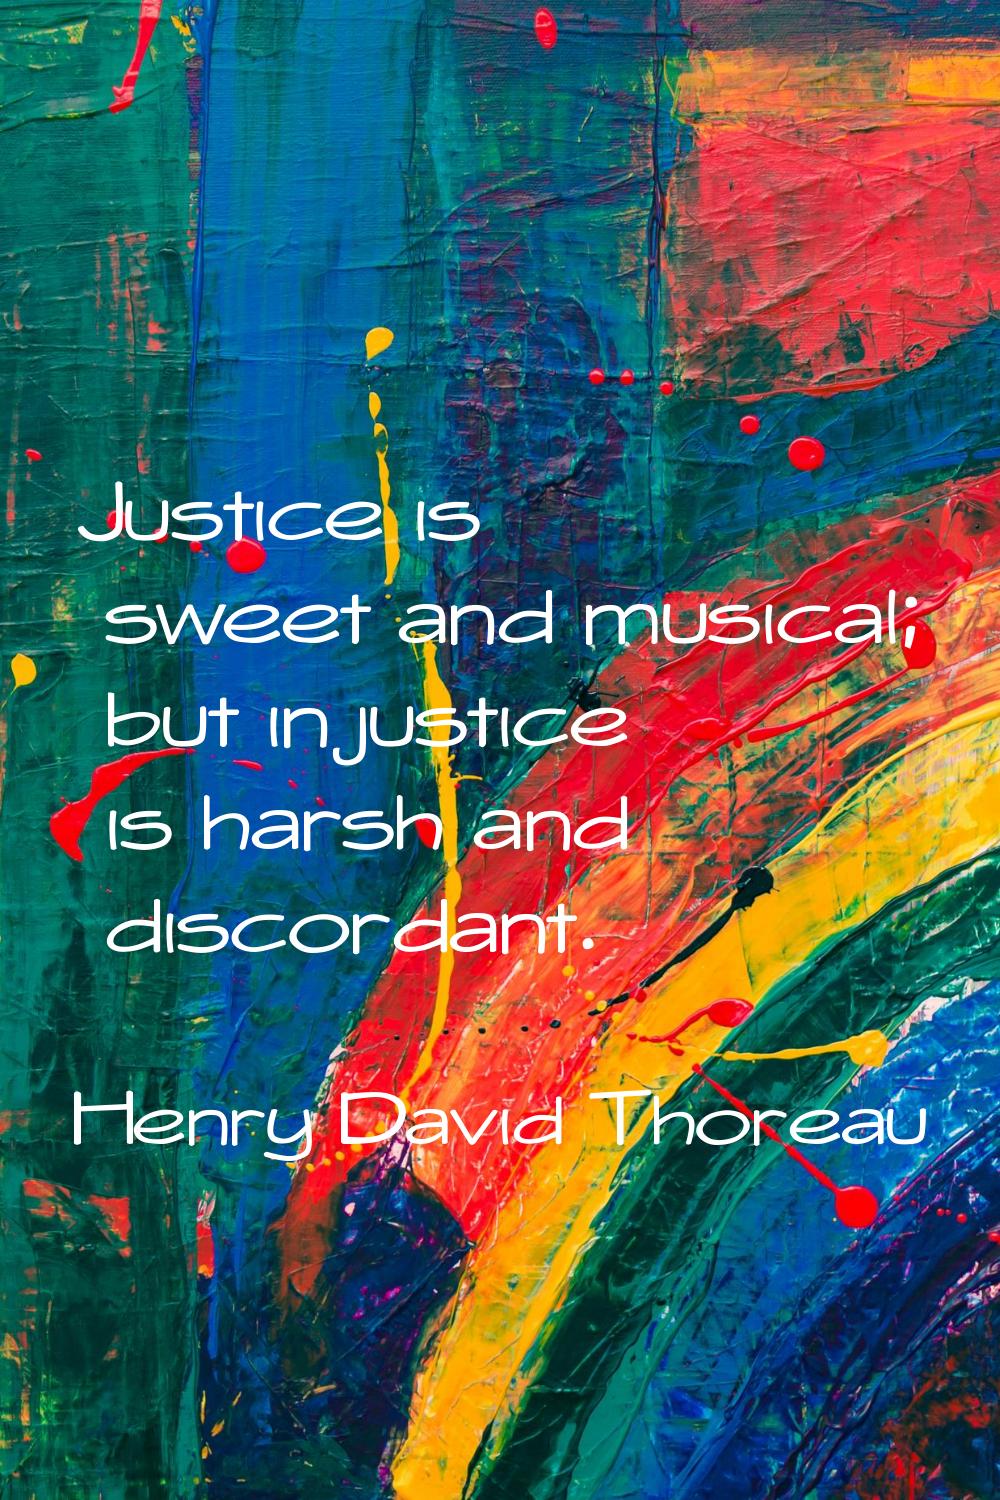 Justice is sweet and musical; but injustice is harsh and discordant.